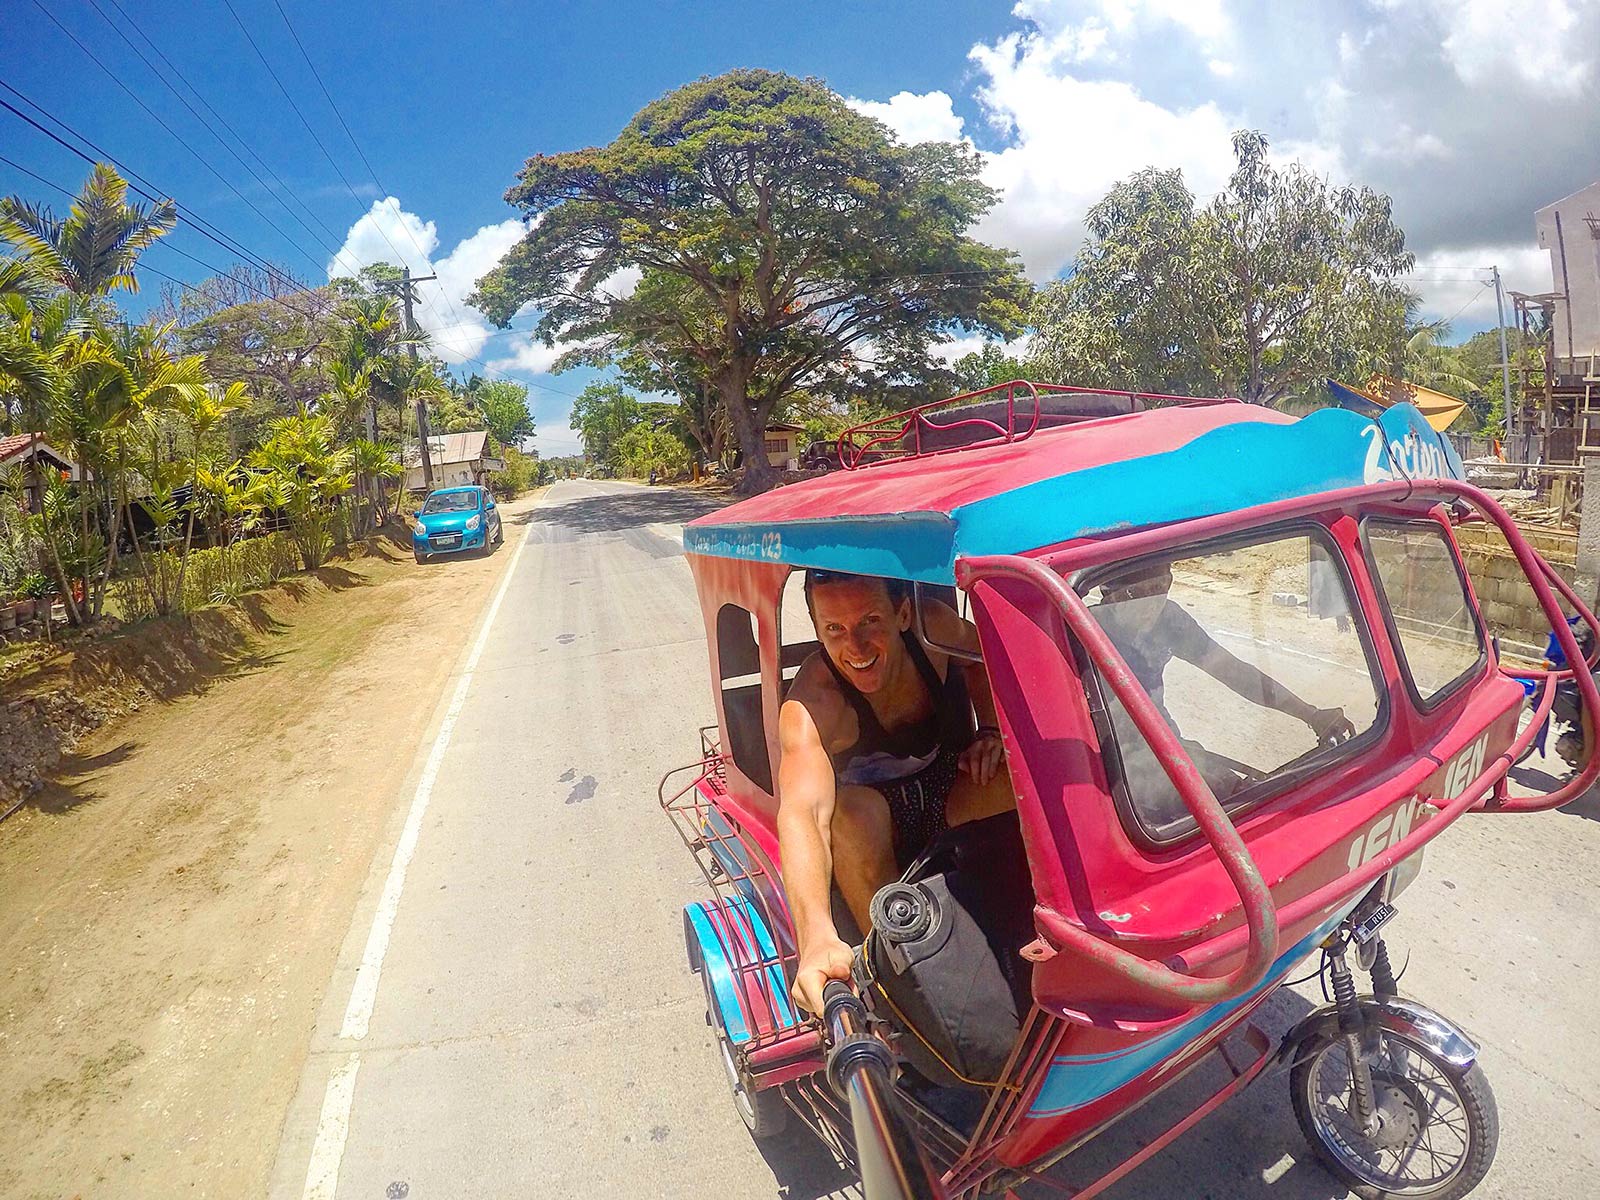 David Simpson riding the motorcycle taxi in Siquijor, Philippines. Friendly locals and Siquijor